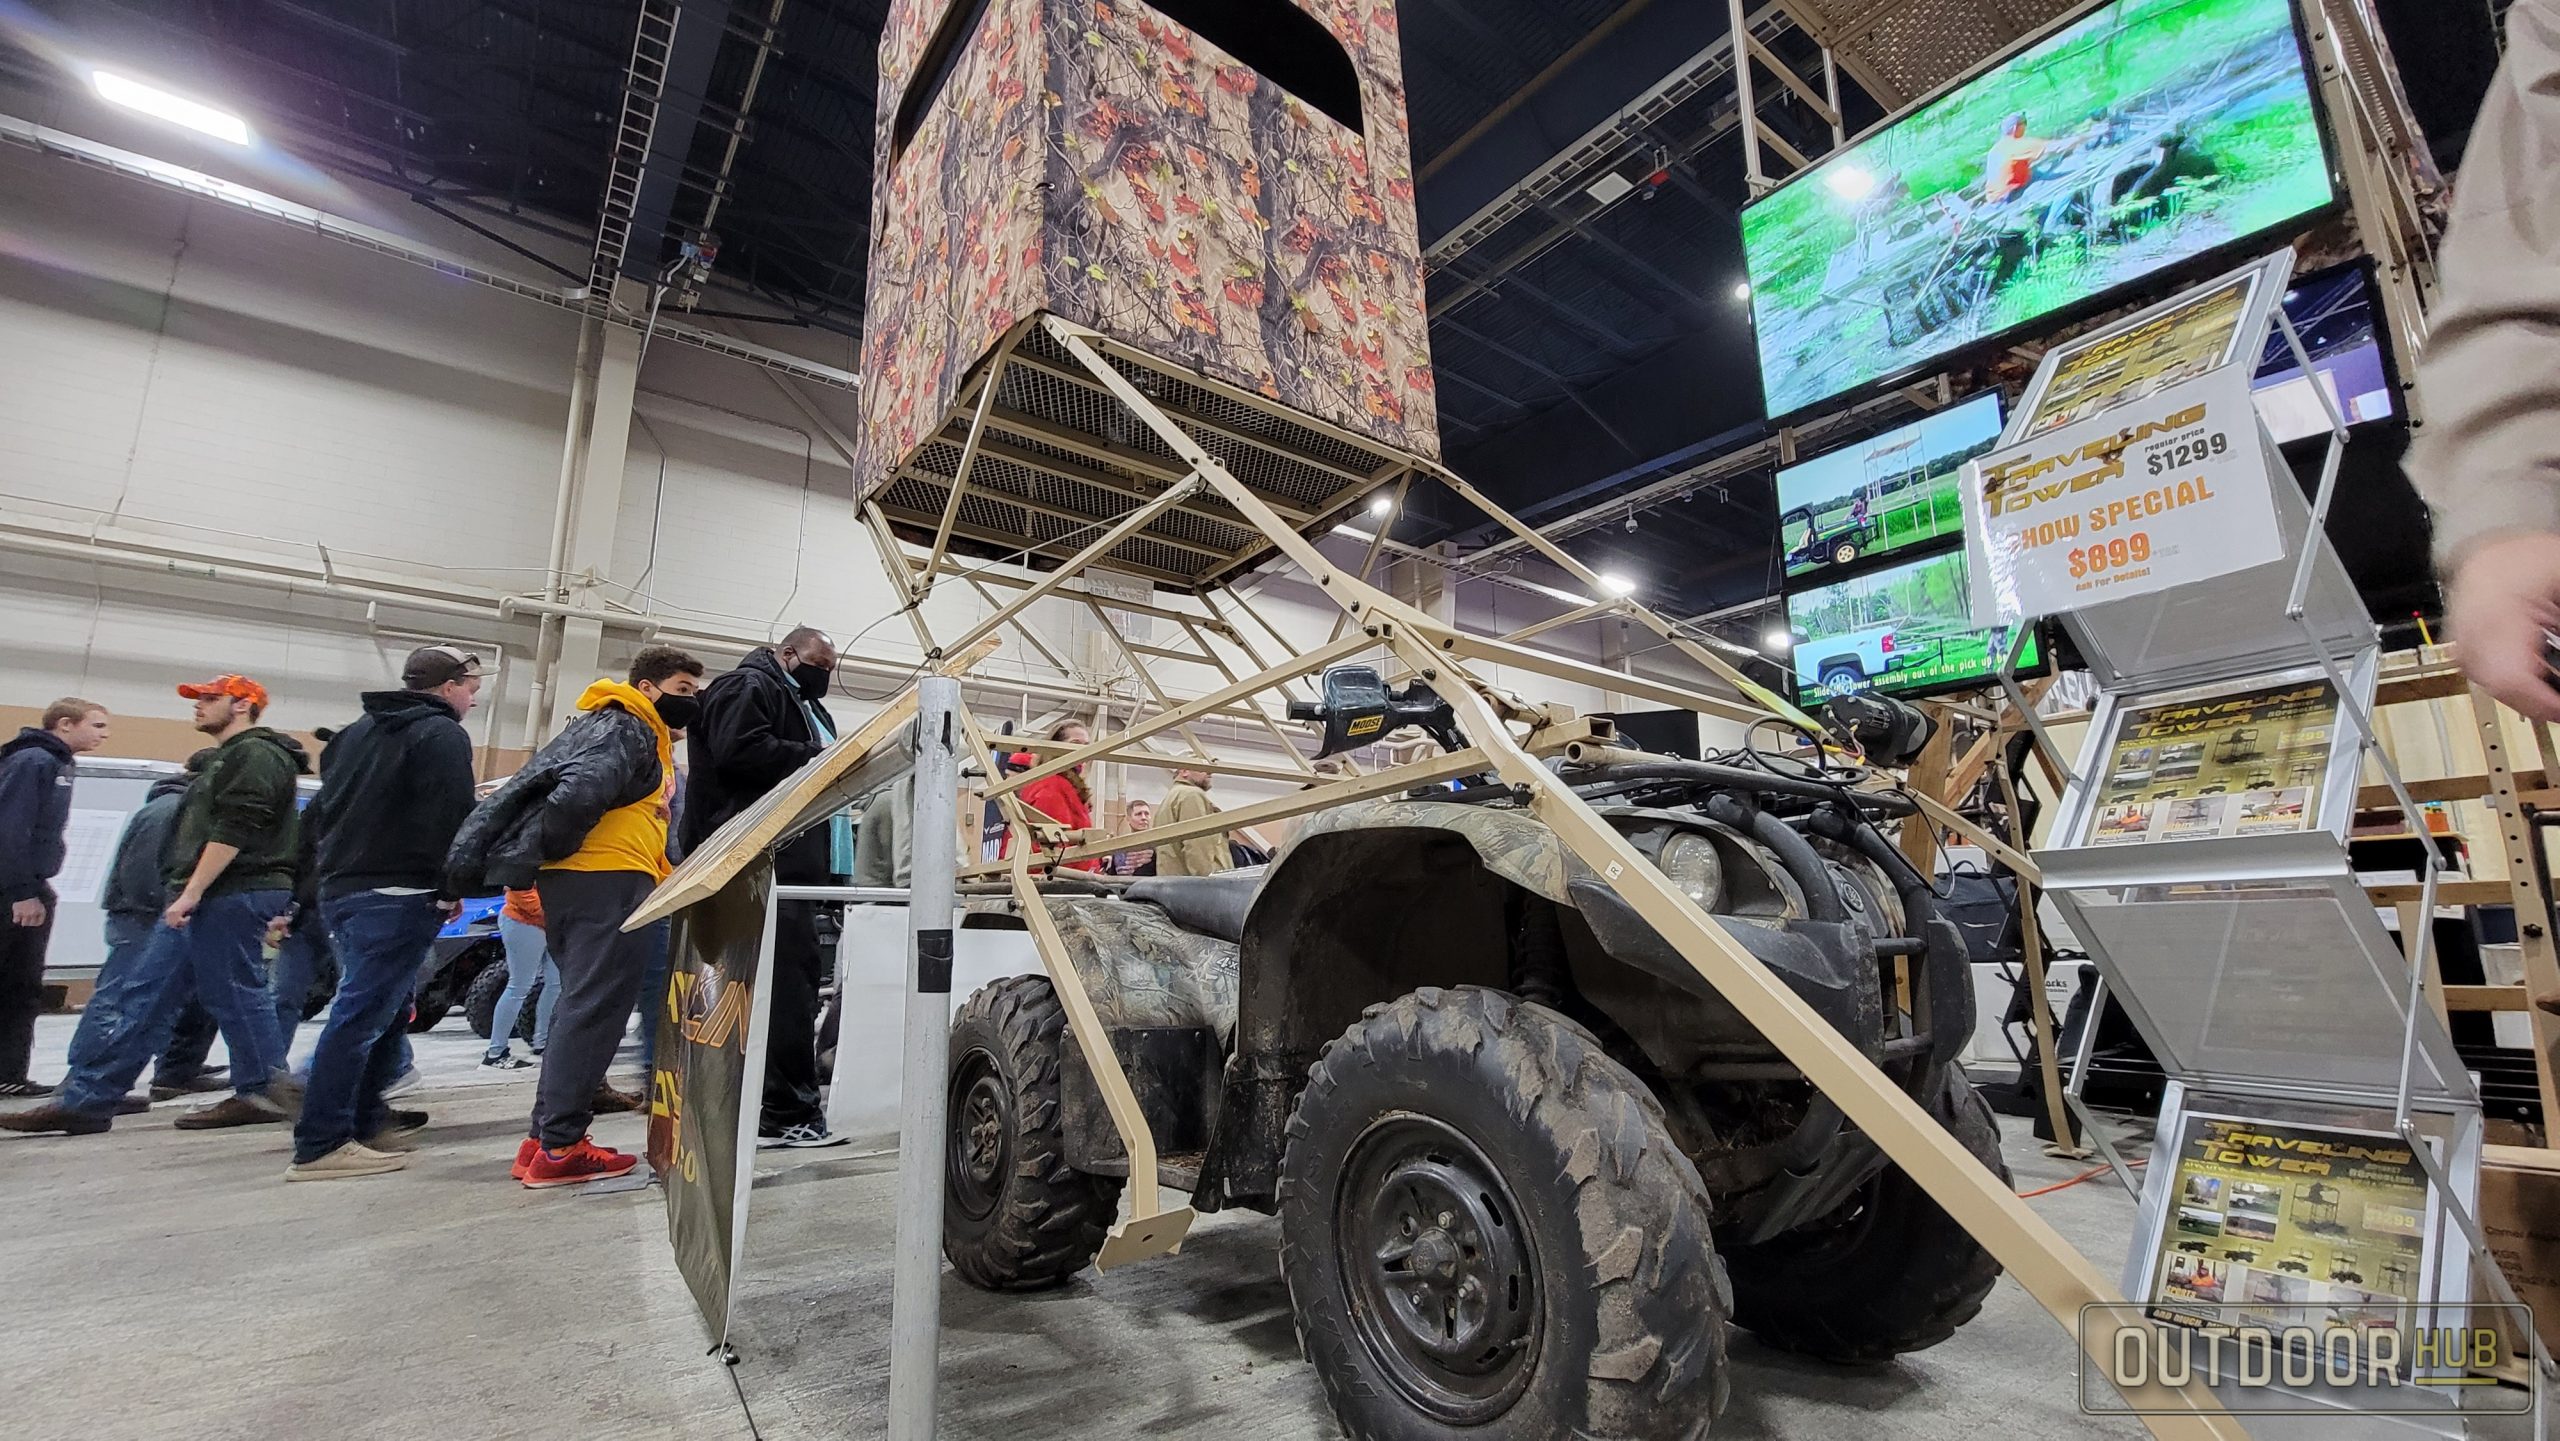 [GAOS 2022] The Unique ATV Mounted Traveling Tower Hunting Blind